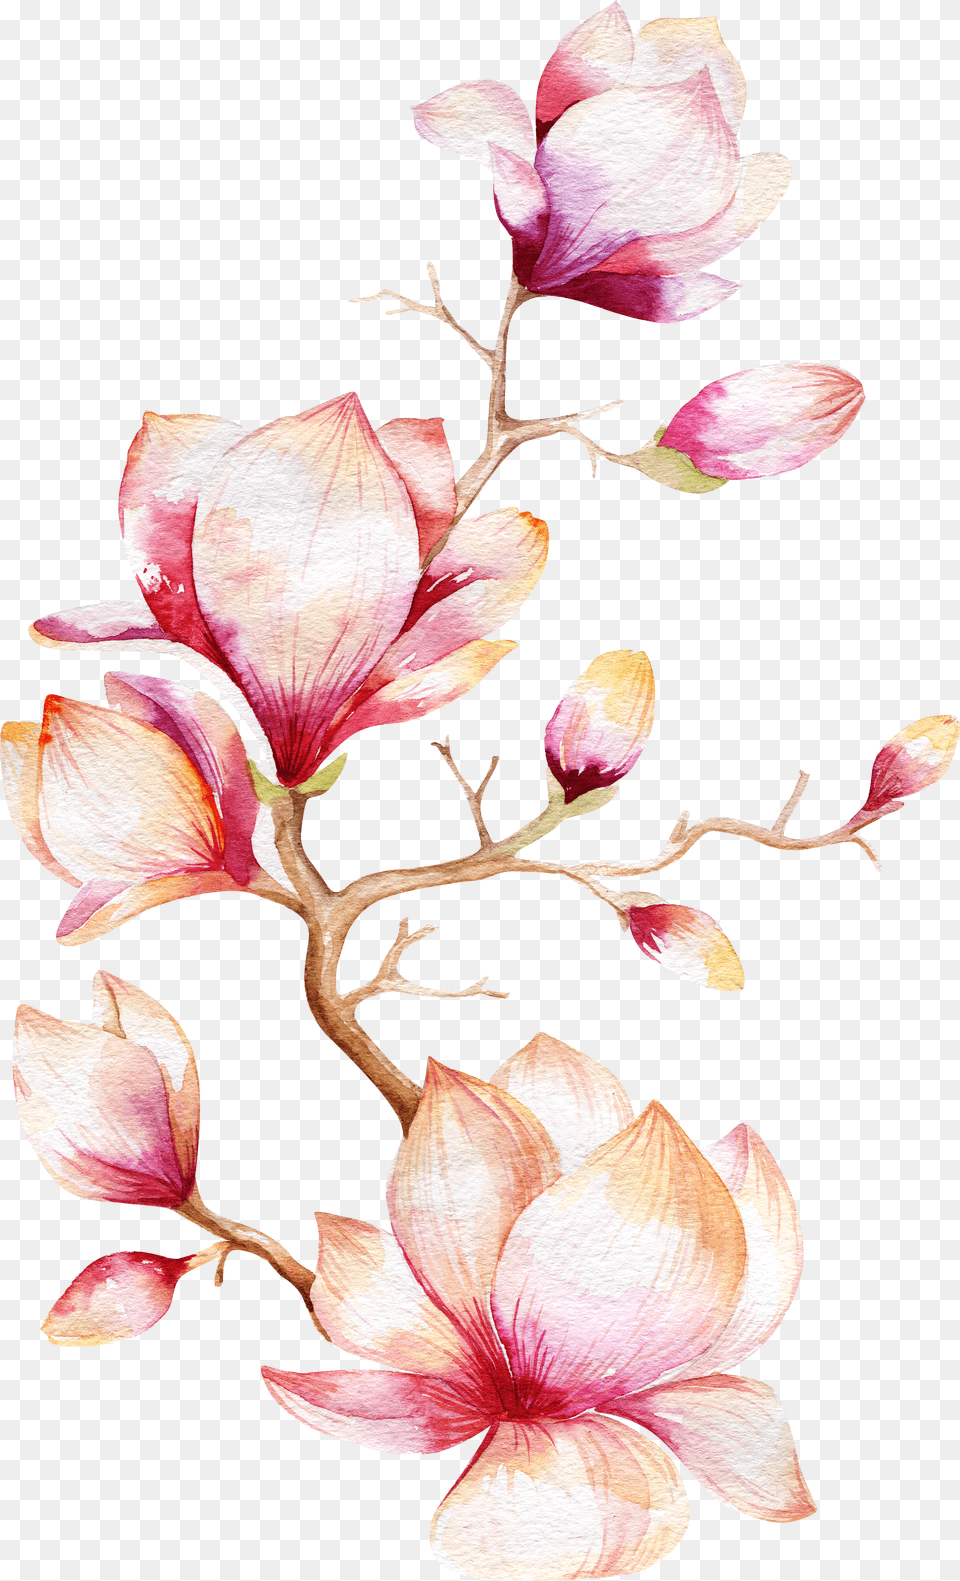 Flower Magnolia Tree Watercolor Painting Orchid Clipart Magnolia Flower Watercolor Free Transparent Png